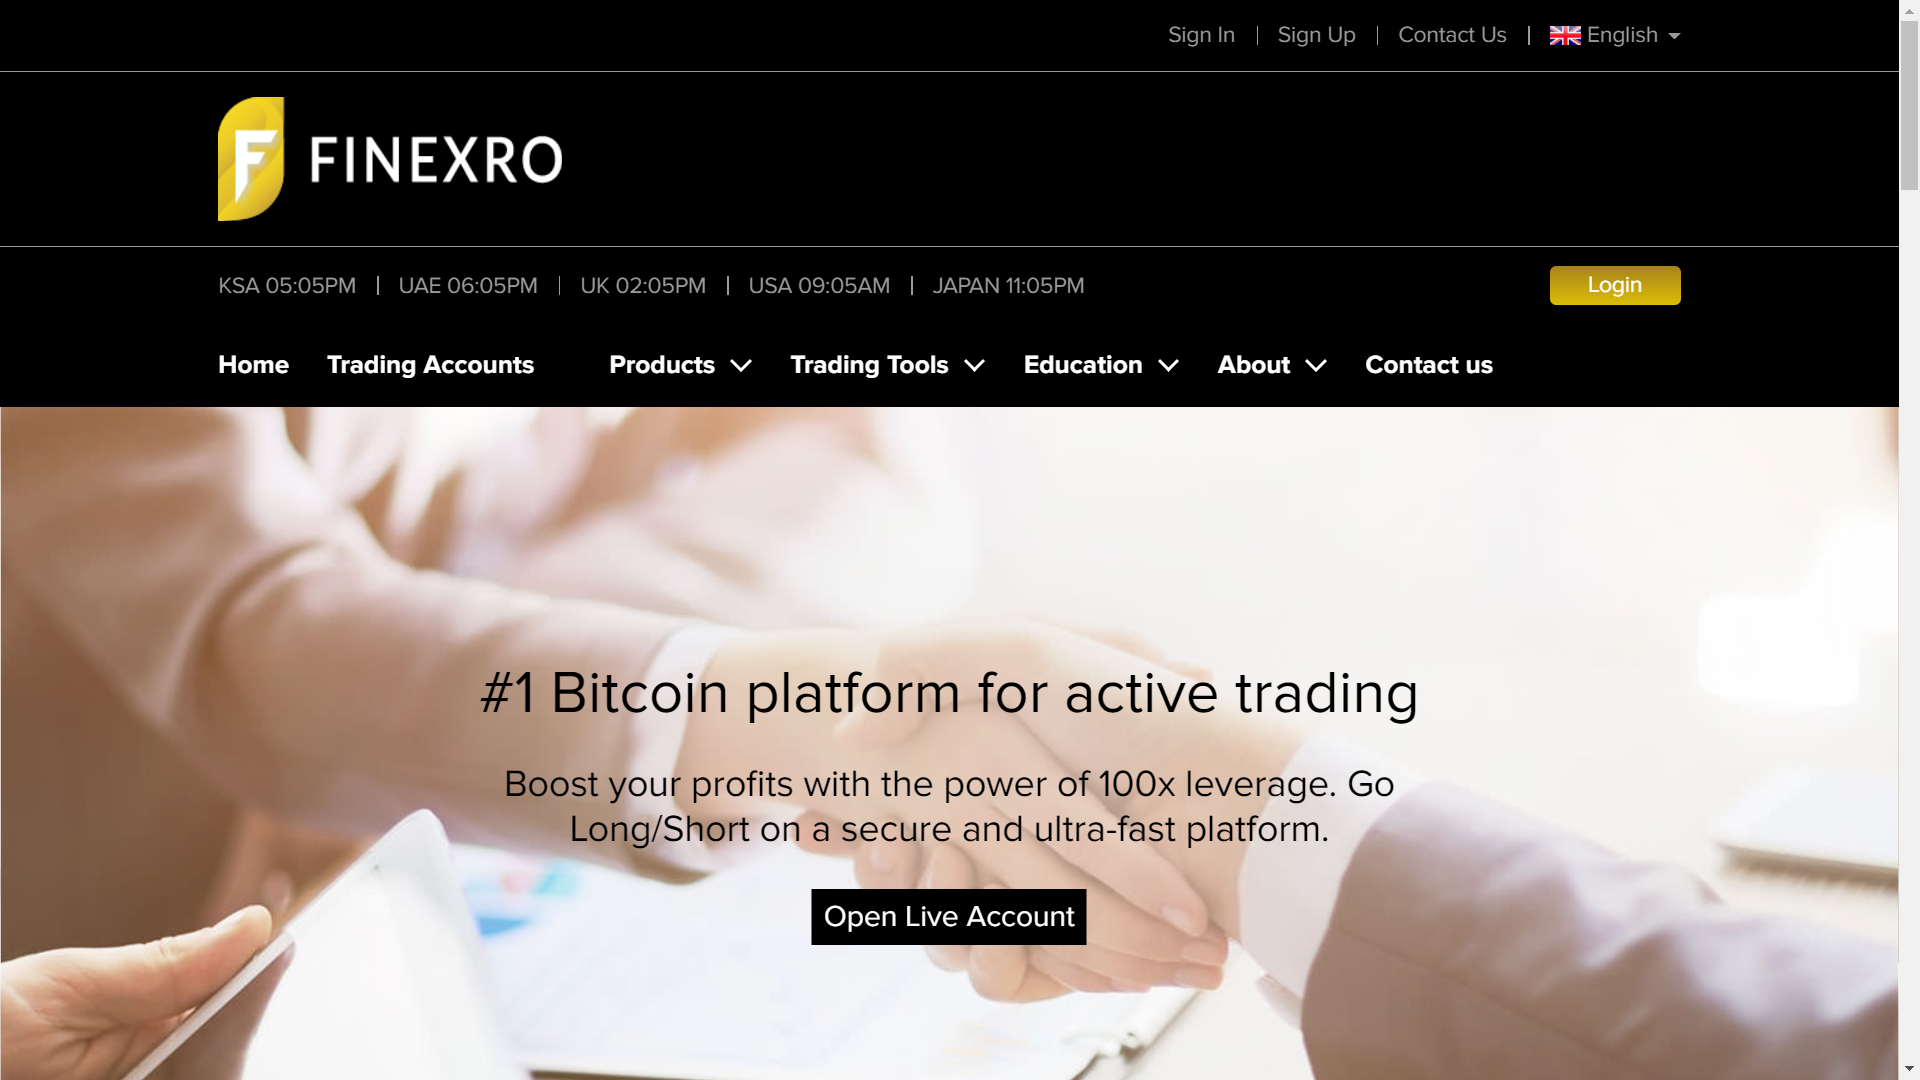 Finexro Review: All That You Need To Know About Finexro Before Signing Up With It